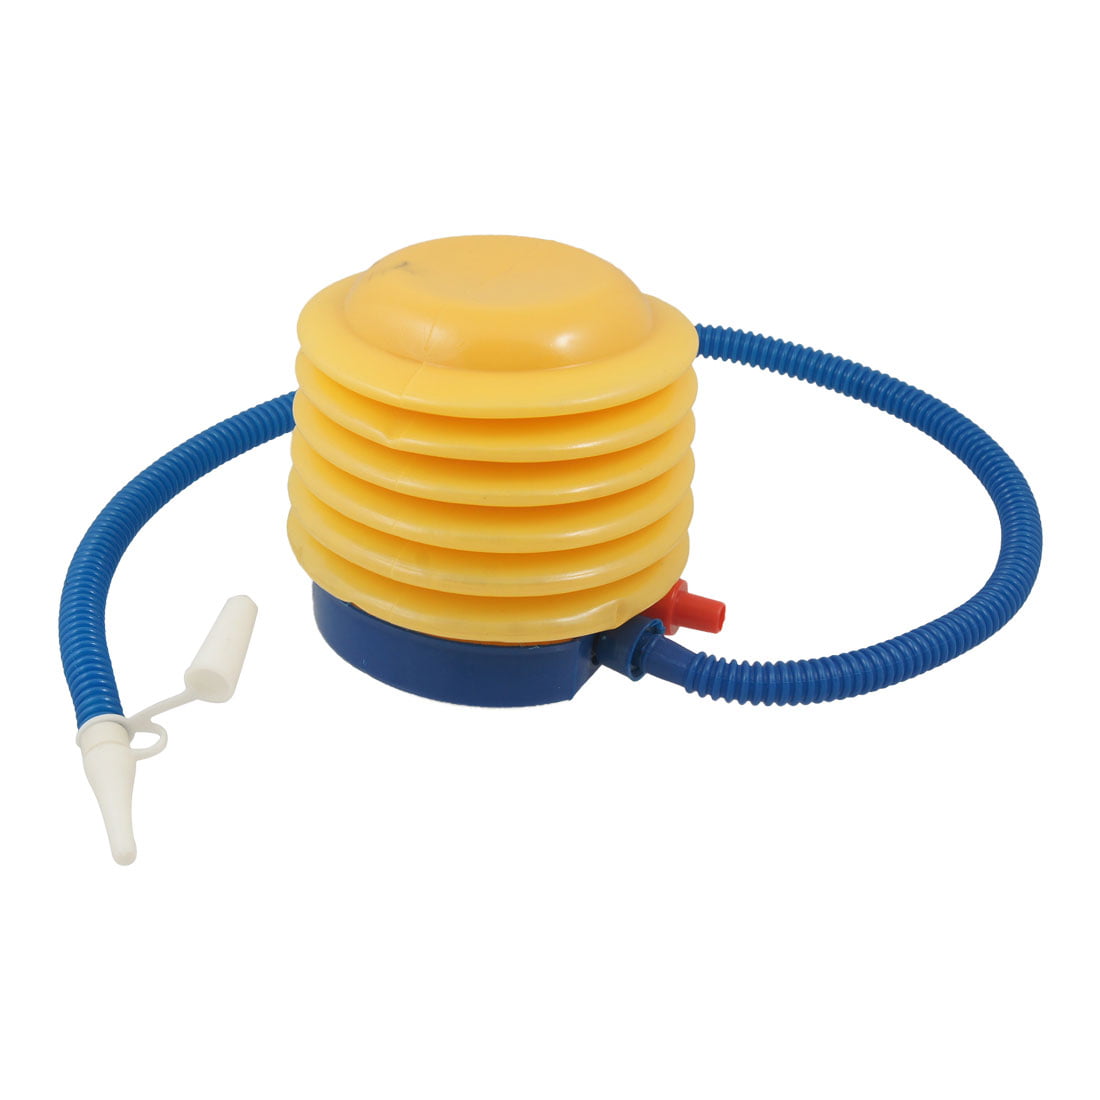 sourcingmap Balloon Easy Hand Foot Operated Air Bellow Pump Inflator Blue Yellow 